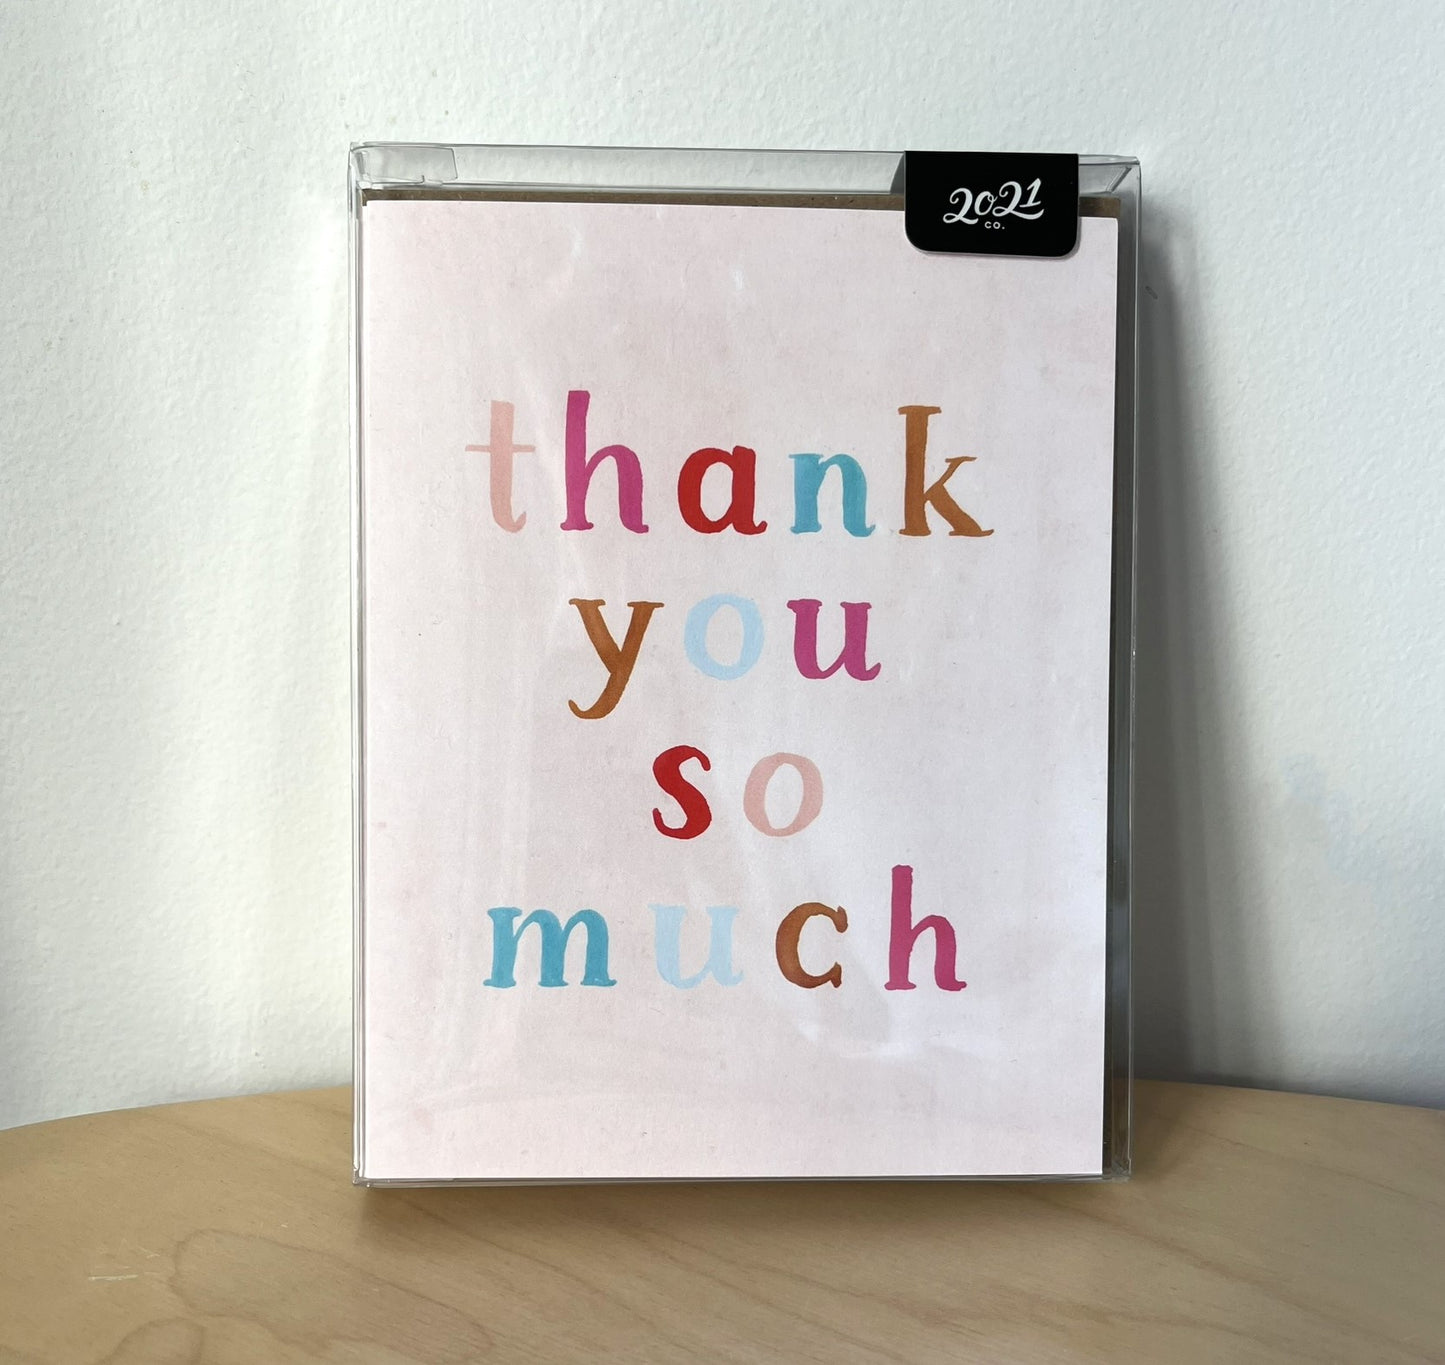 Thank You Cards - Thank You So Much (Set of 6)